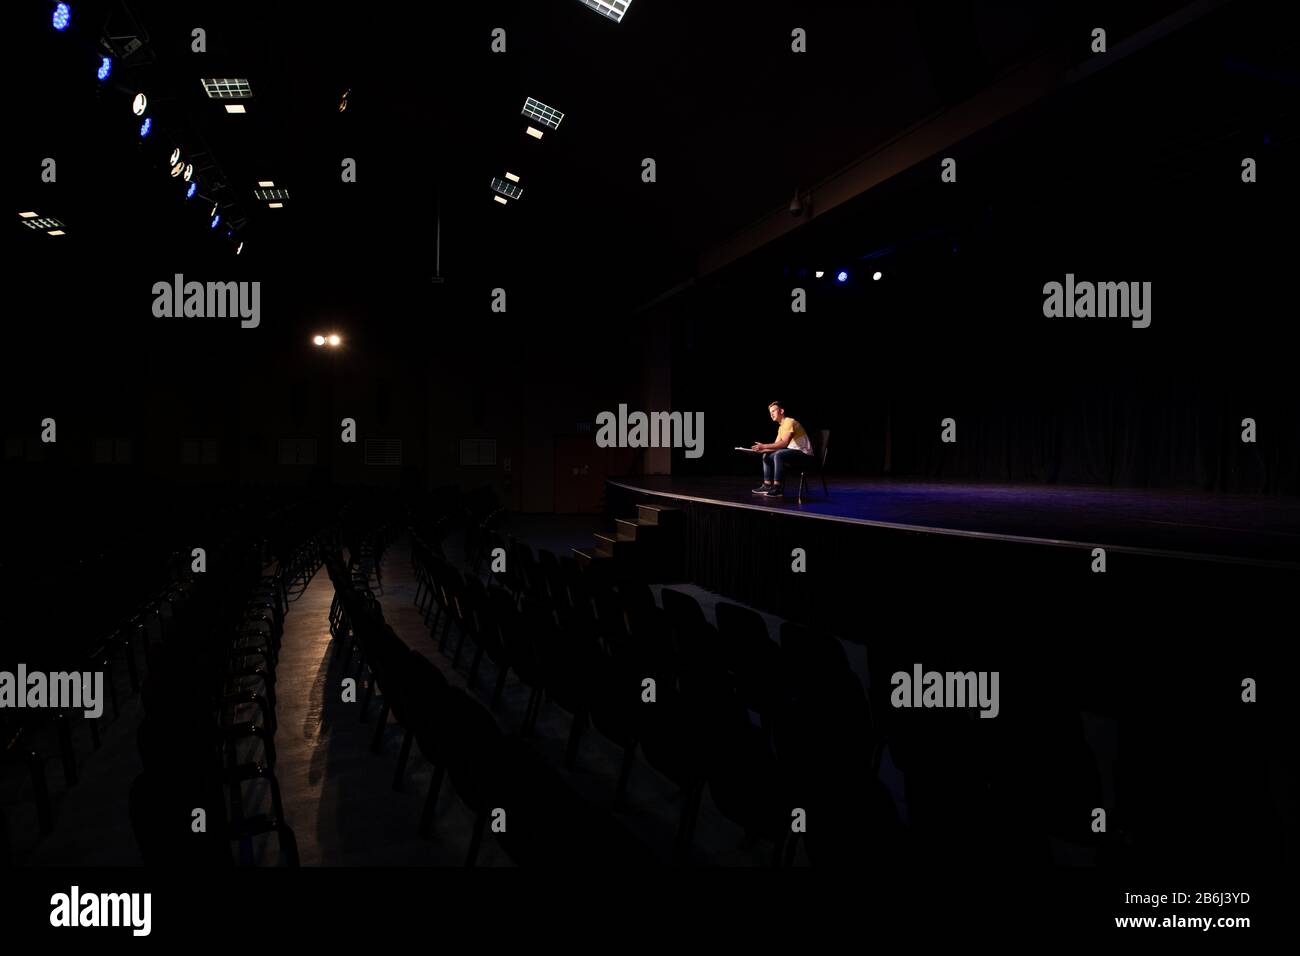 Distant view of student practicing at the theater Stock Photo